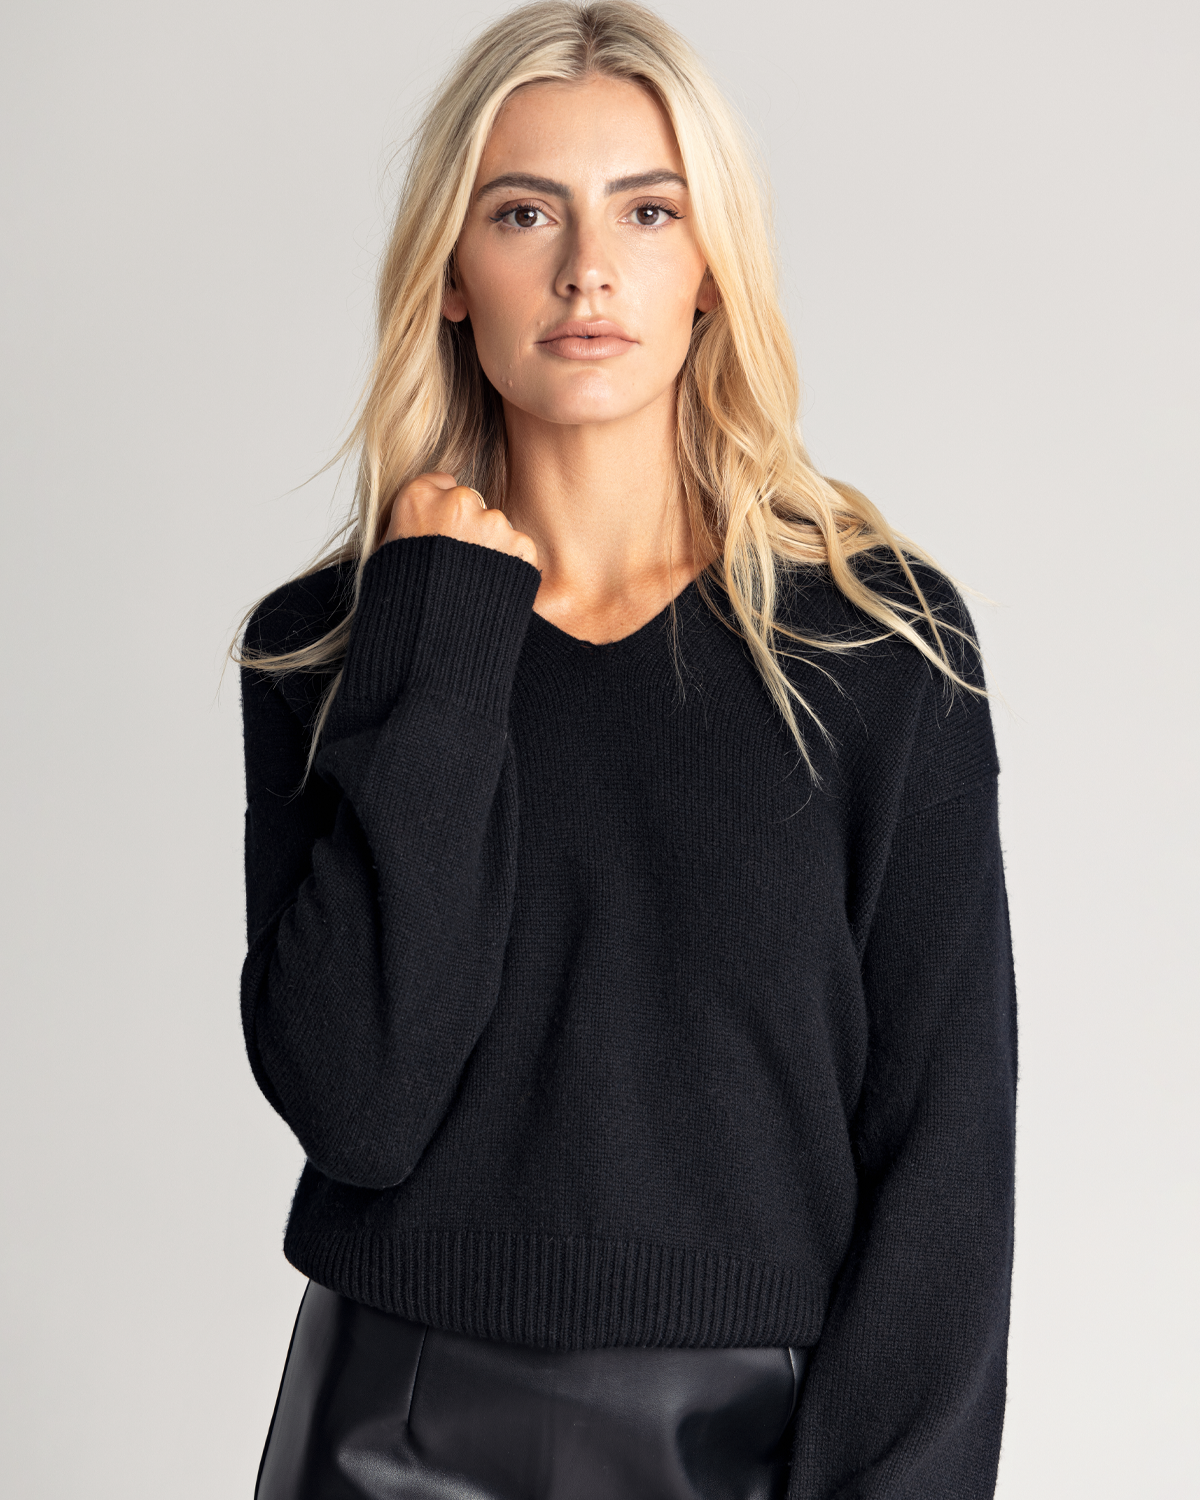 The Relaxed Collared Sweater is a luxurious testament to both warmth and style, expertly crafted from a sumptuous wool and cashmere blend. Designed for a relaxed fit, its oversized silhouette drapes effortlessly, embracing comfort without compromising on chic sophistication. Now available at Romy. 